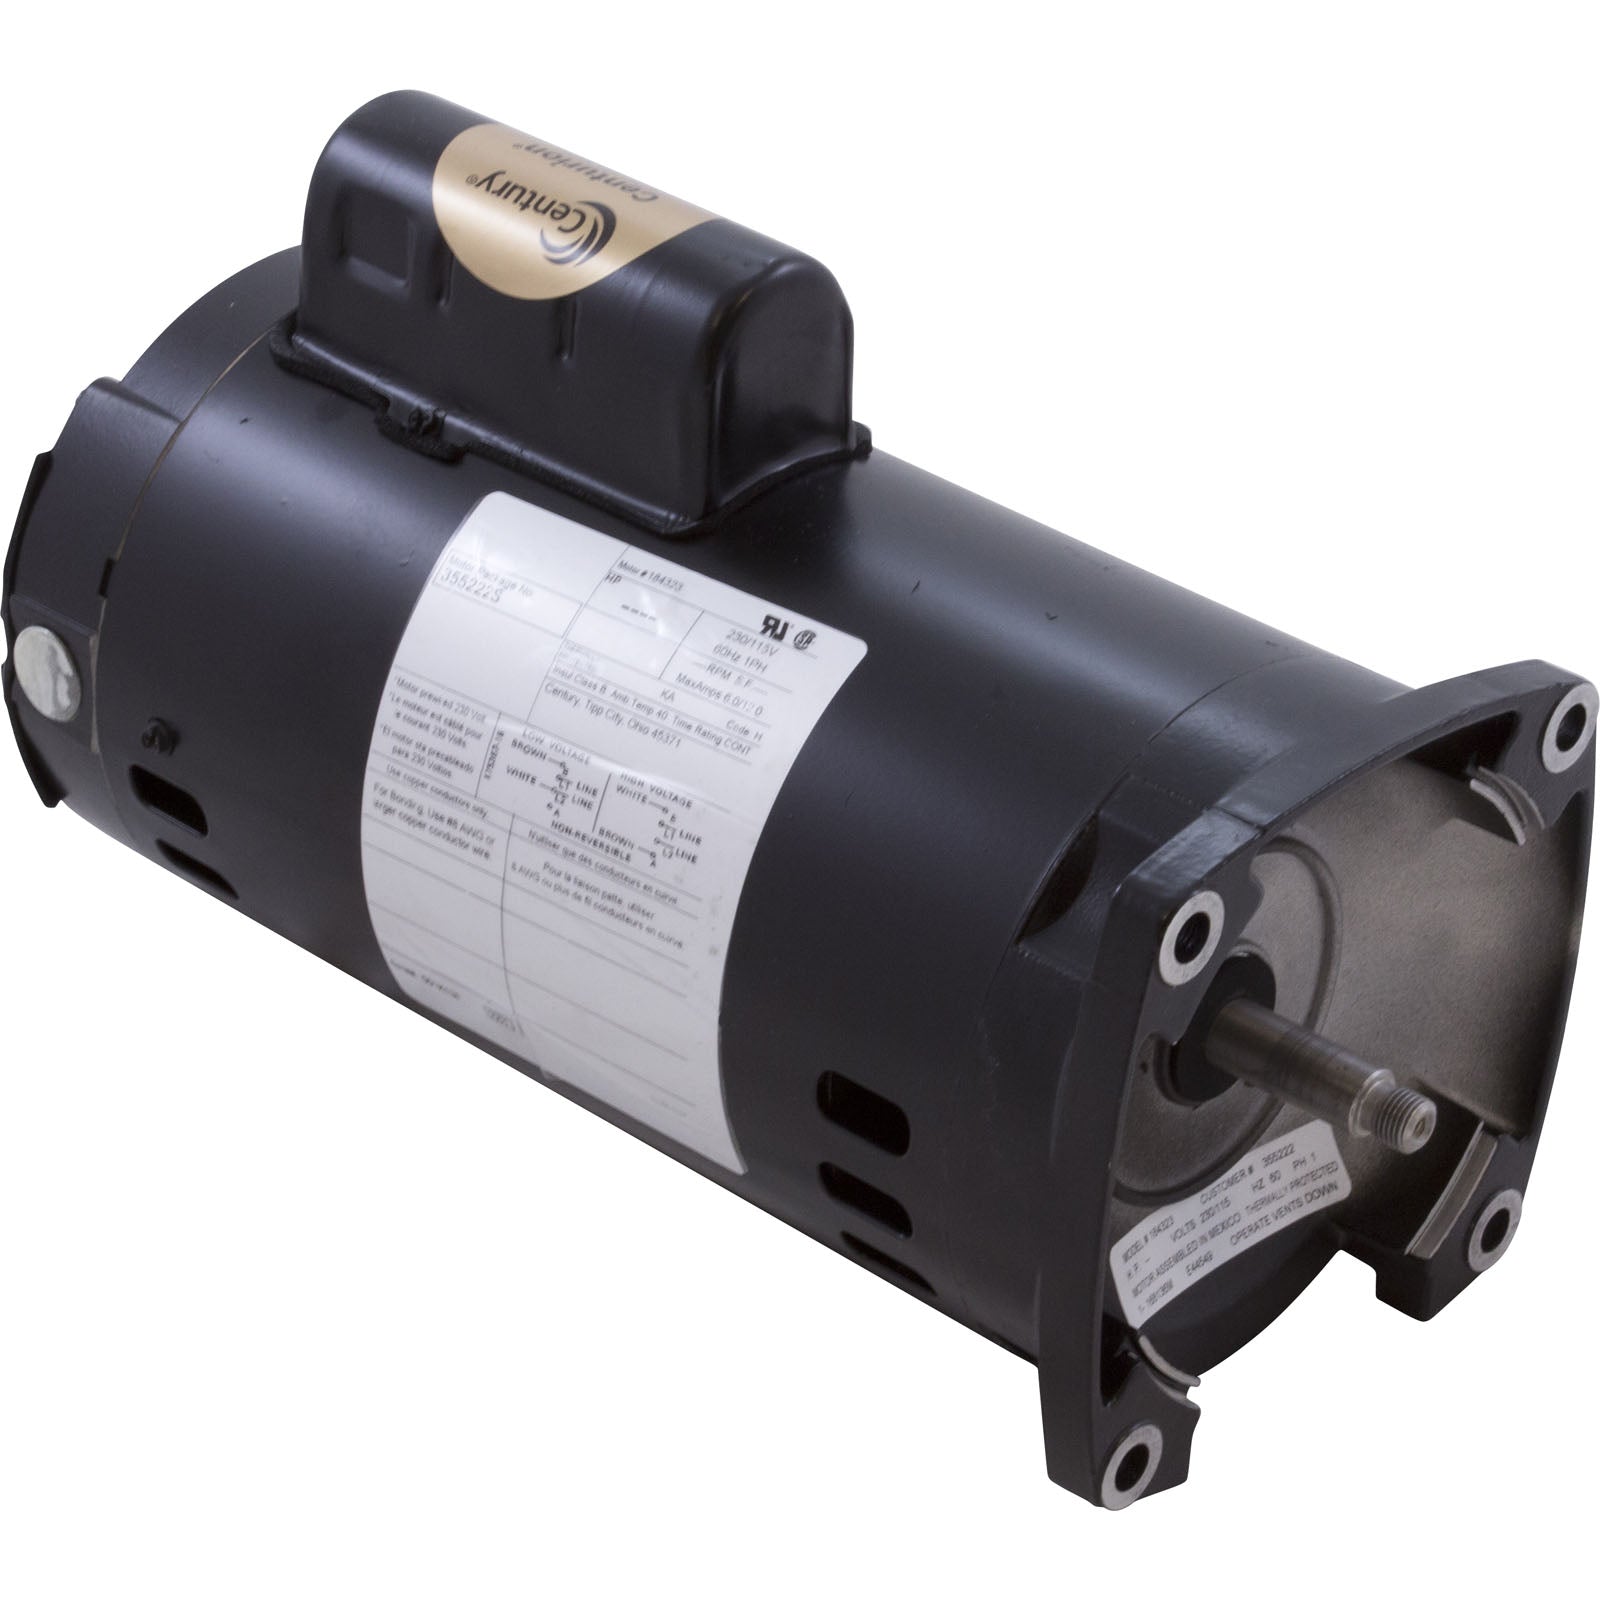 Pentair 355222S Motor For WaterFall™ Specialty Pump Model AF-180, AFP-150 and 180